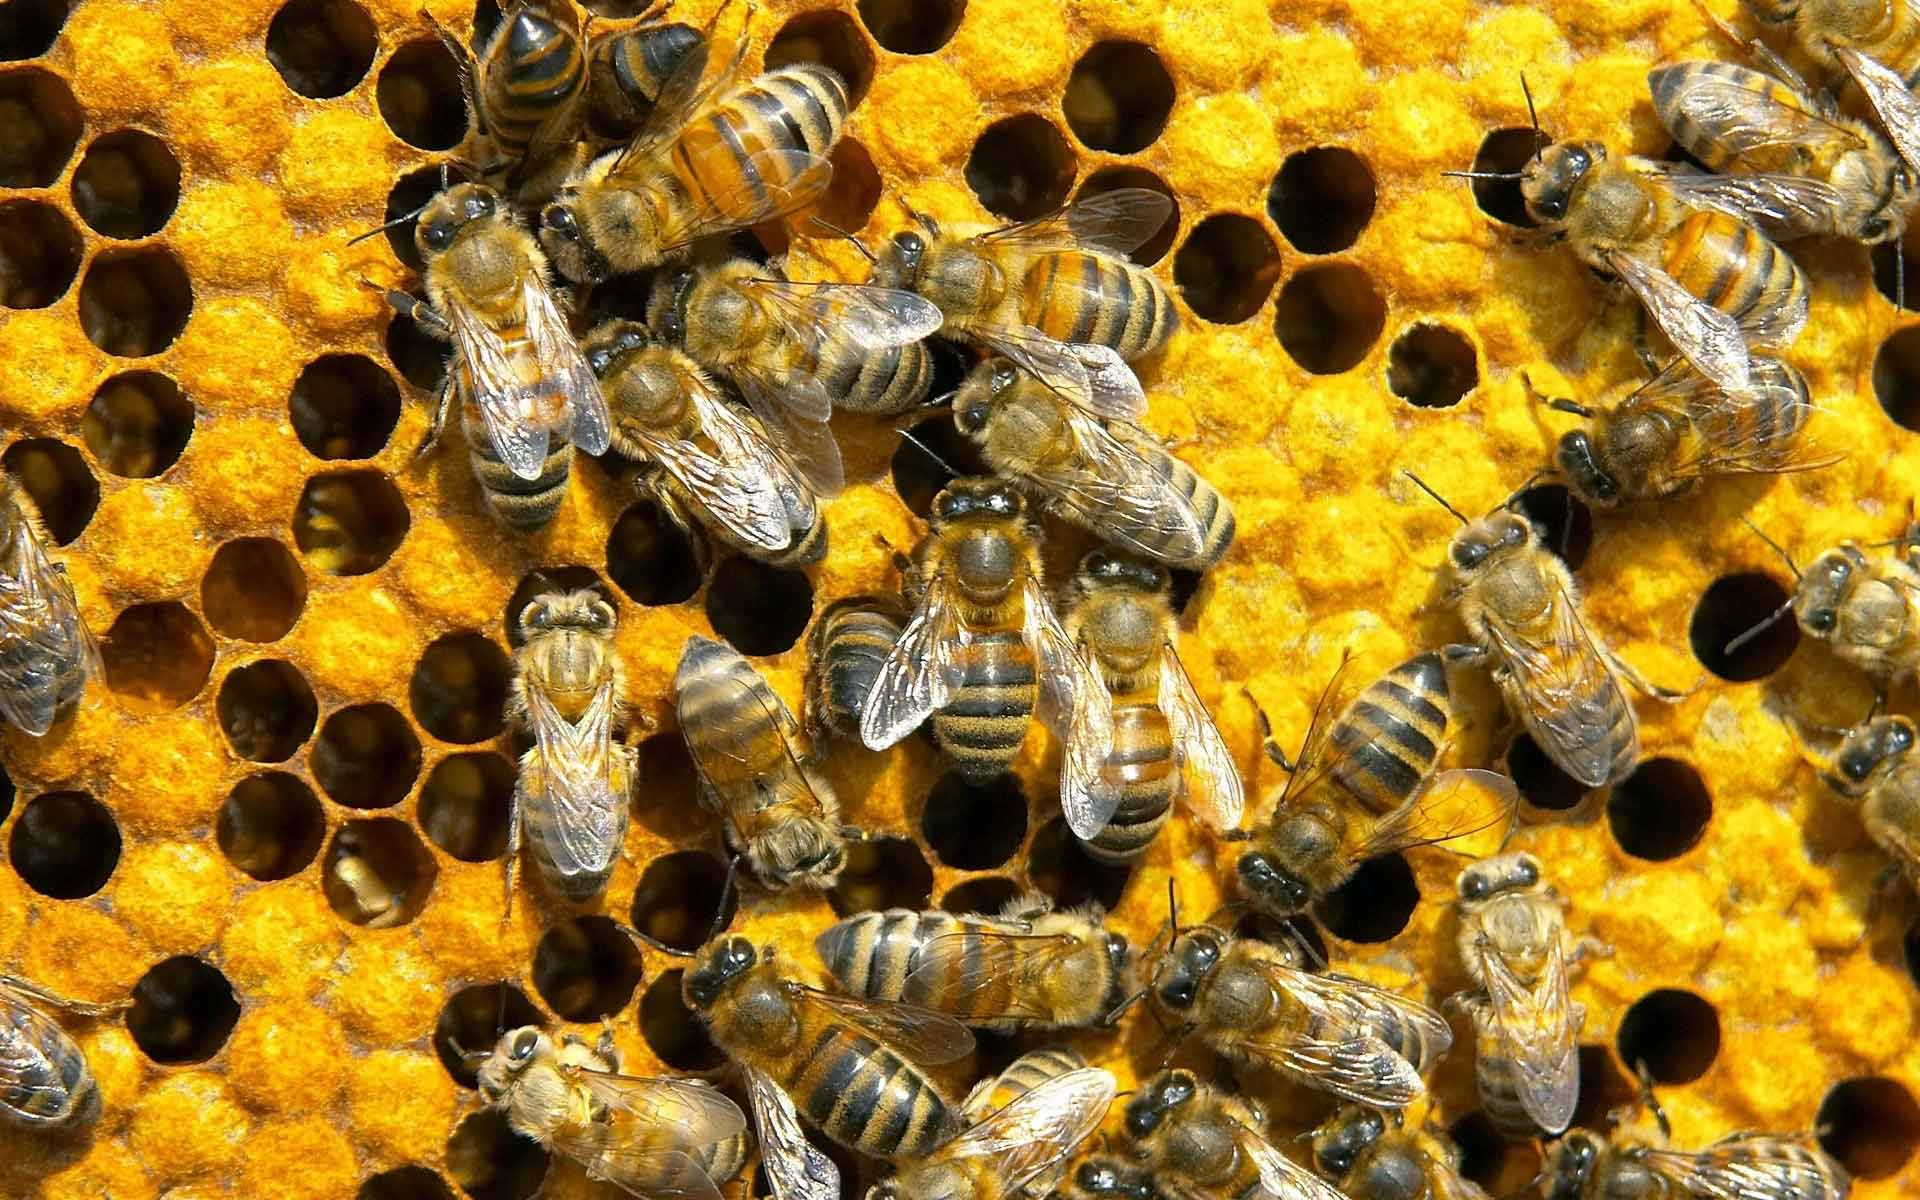 Why Are Bees Sick? A Search for Synergistic Effects